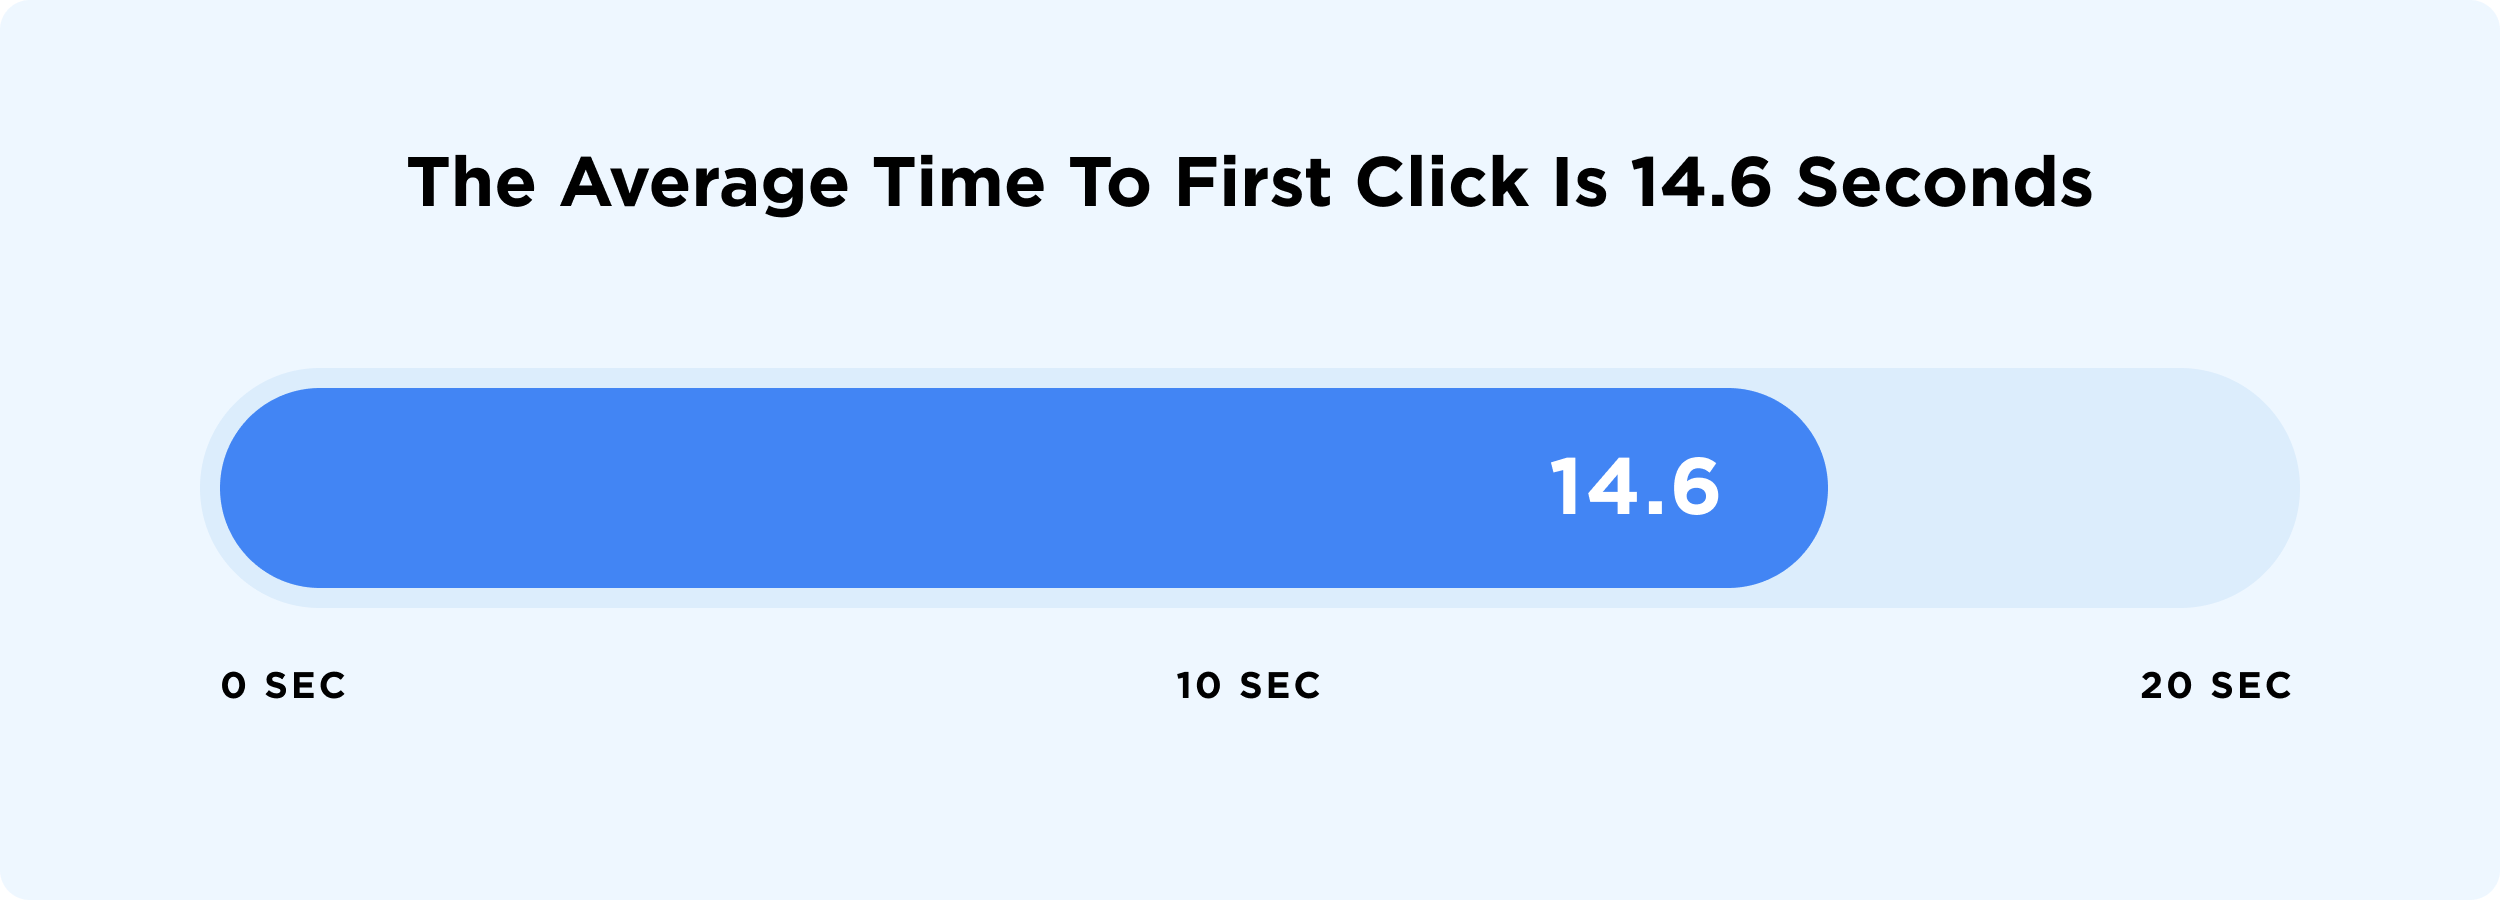 The Average Time To First Click Is About 15 Seconds